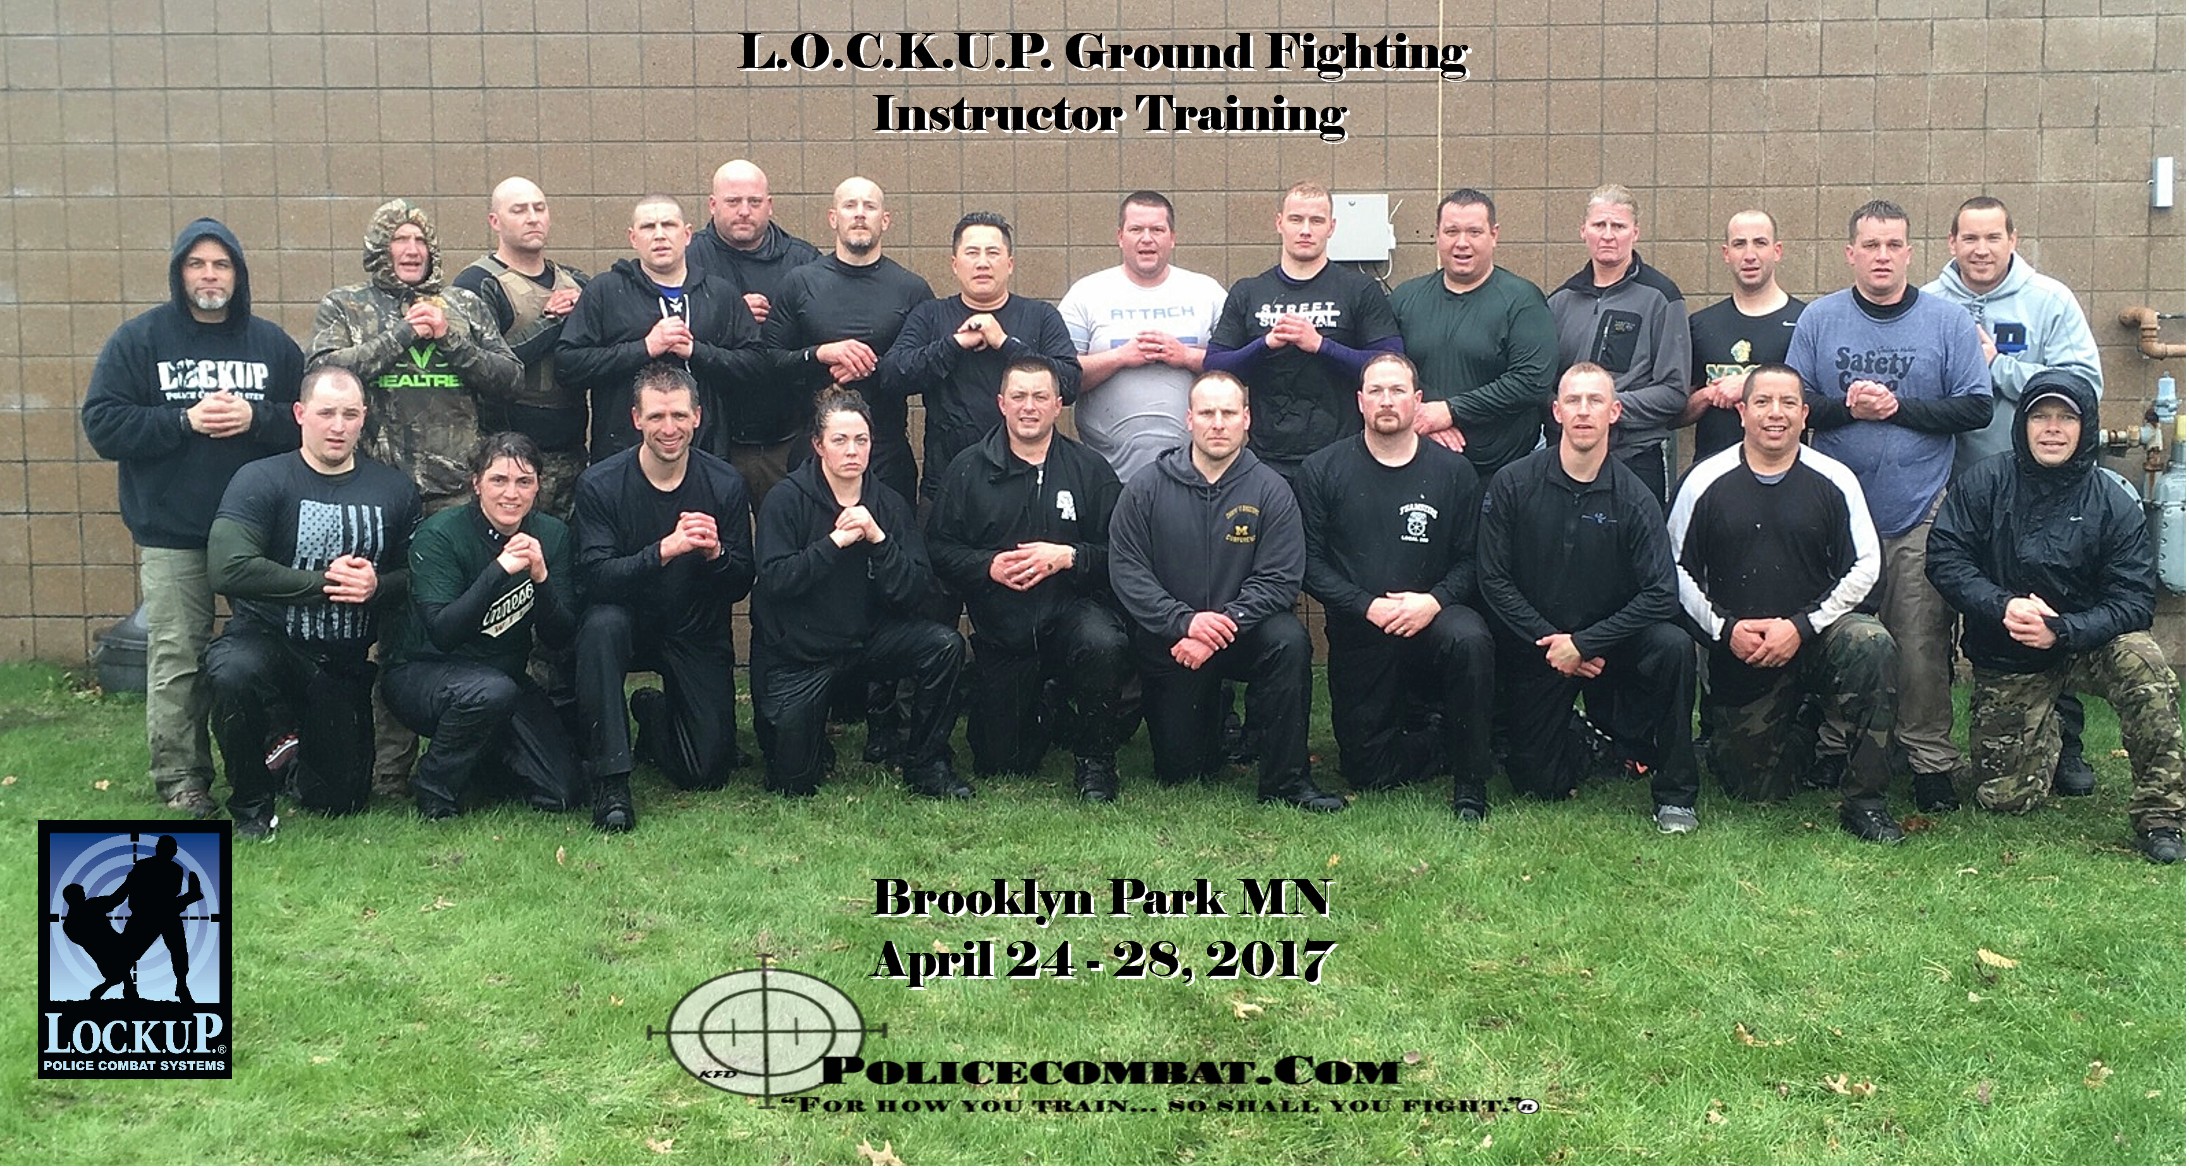 Brooklyn Park MN-Ground Fighting Instructor Training SOLD OUT!